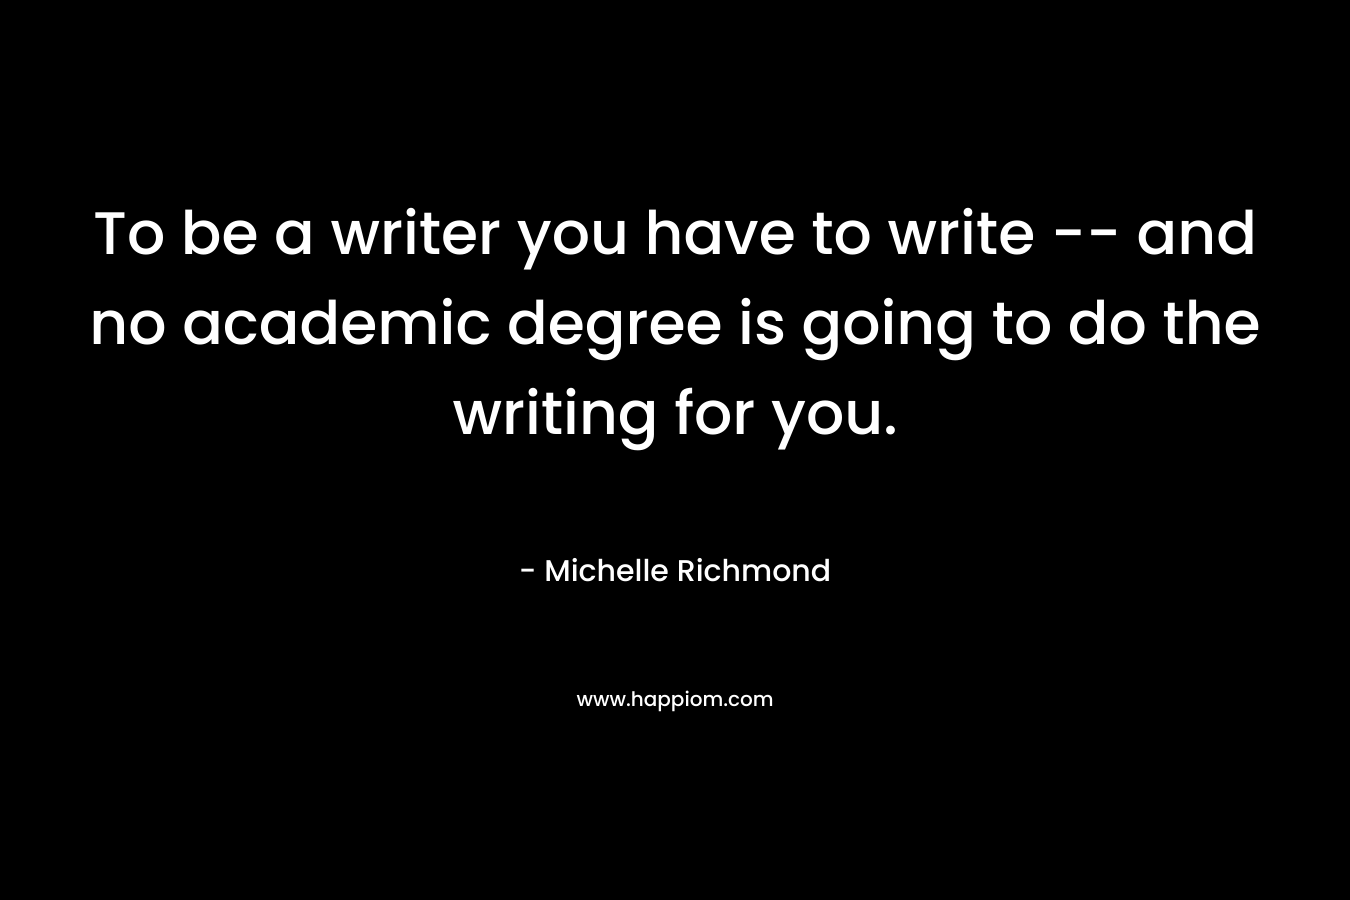 To be a writer you have to write -- and no academic degree is going to do the writing for you. 